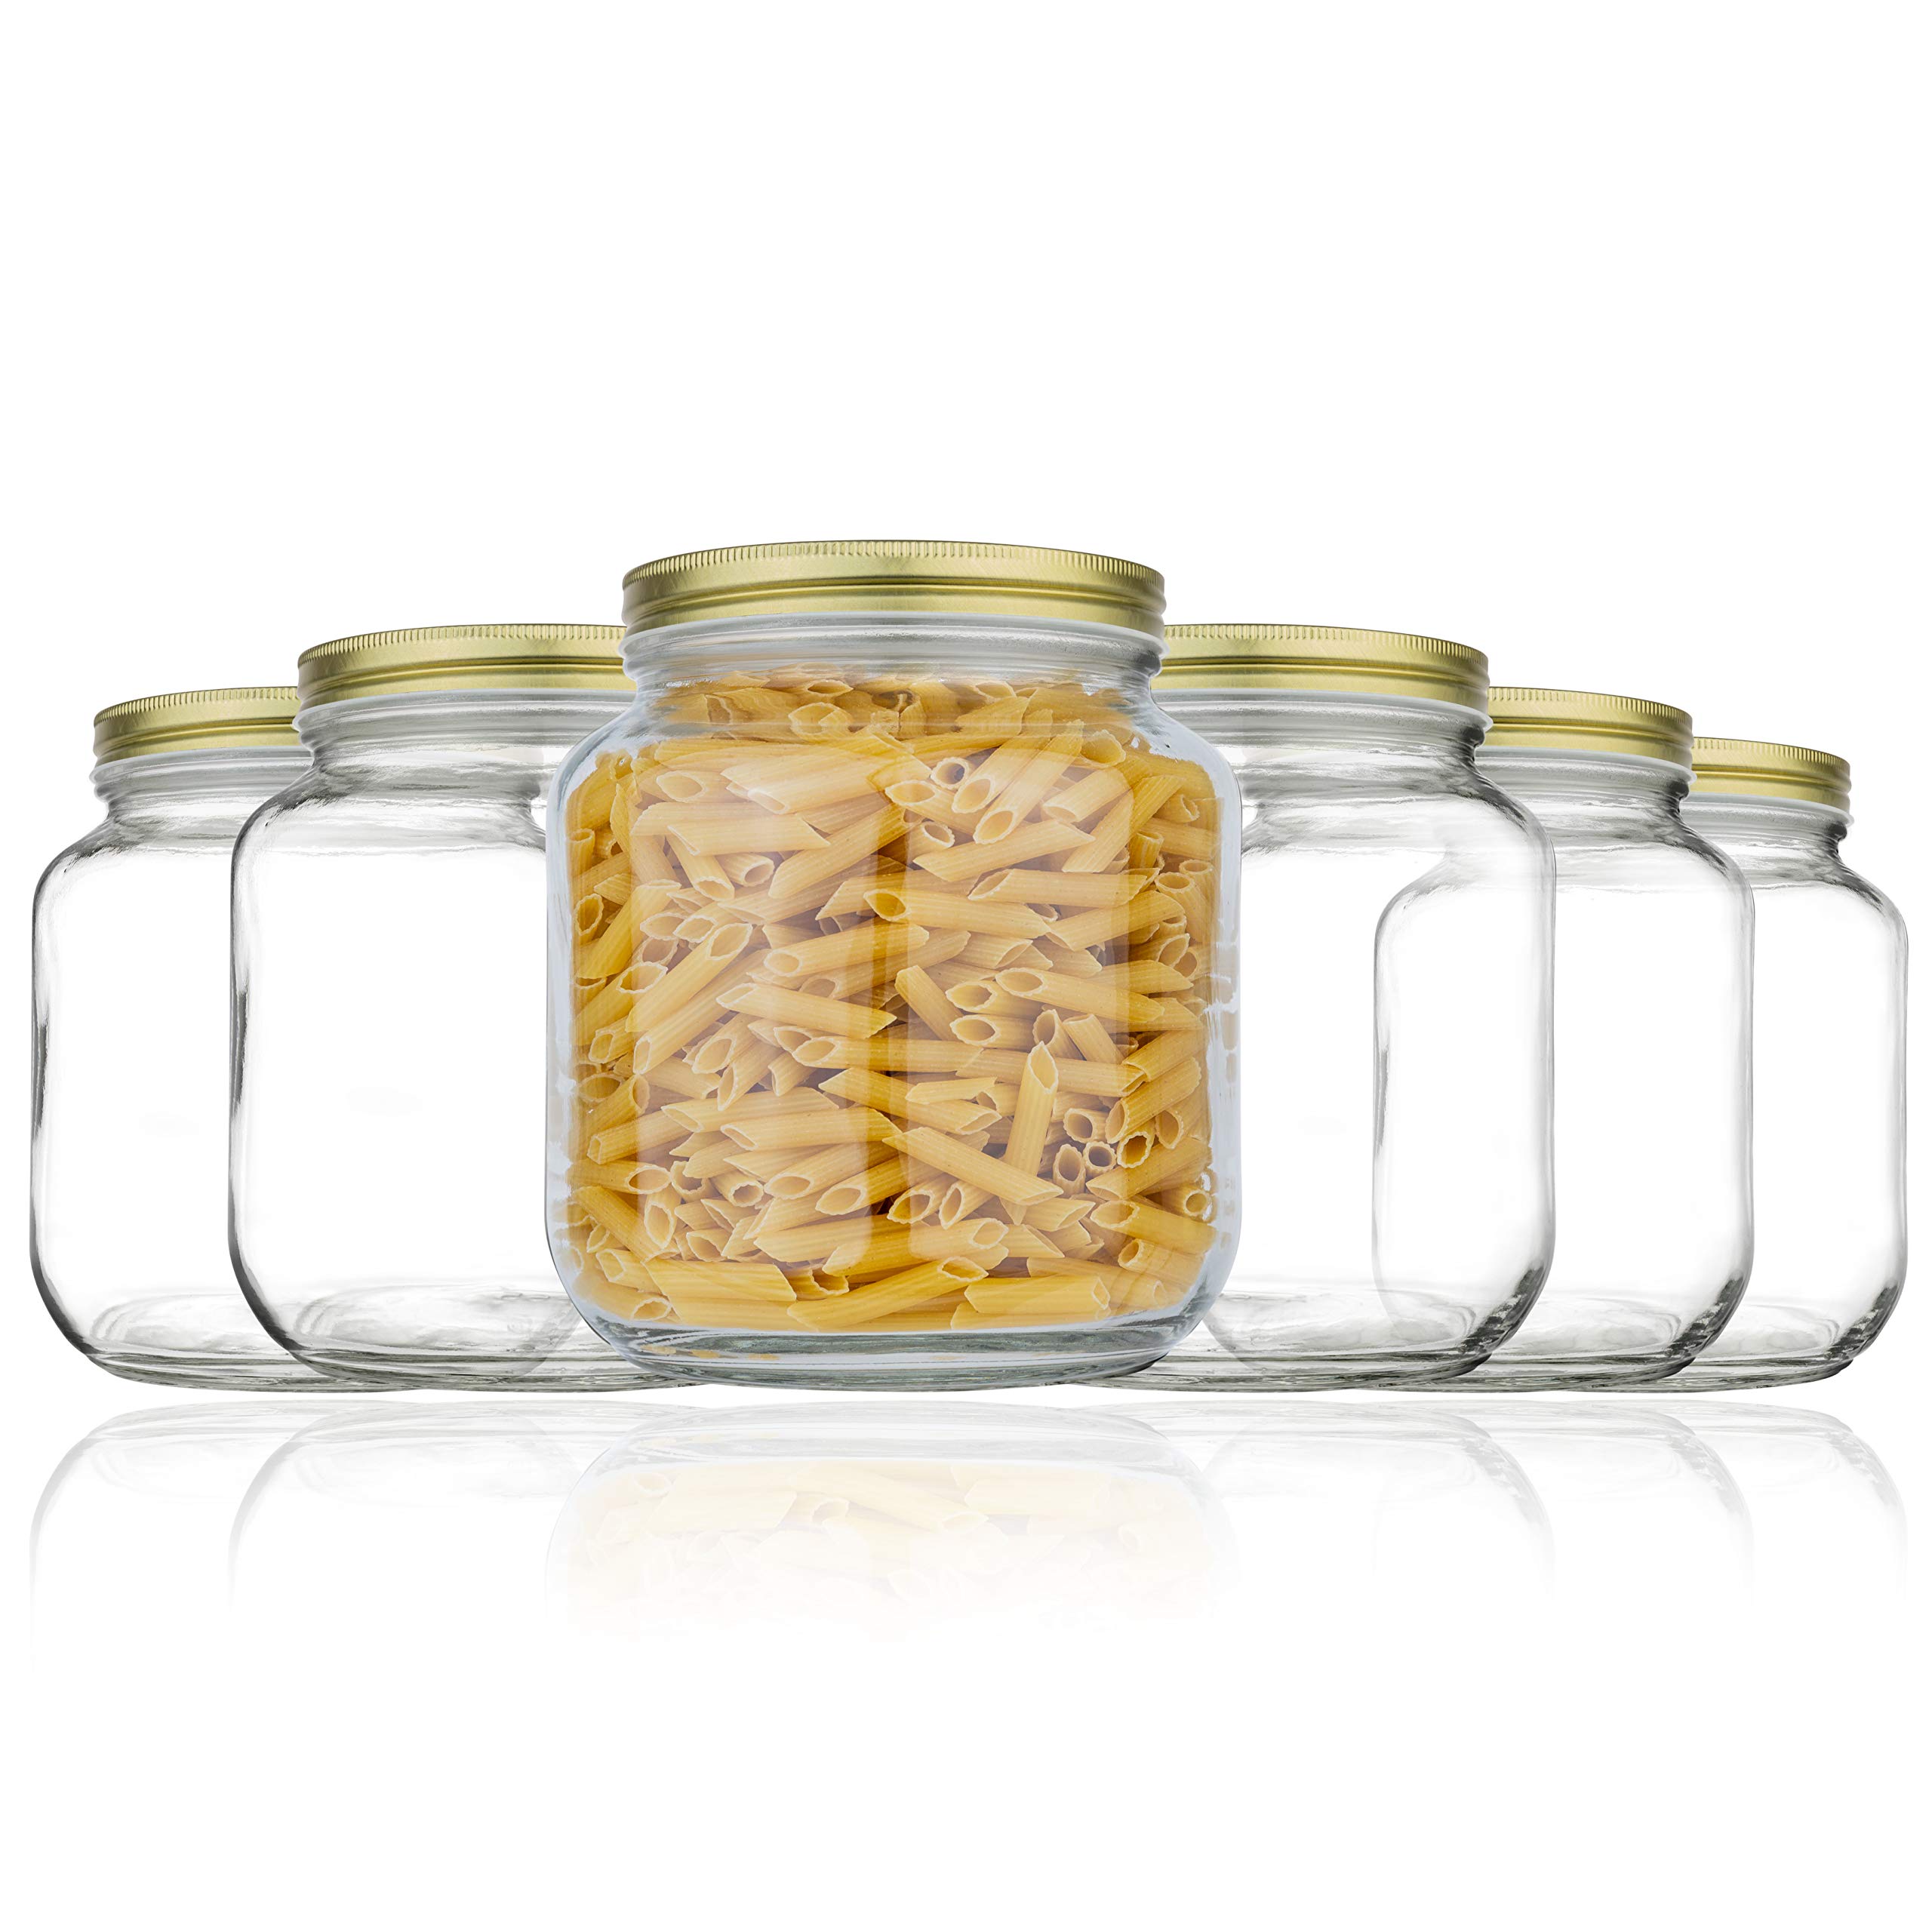 6 Pack of Glass Mason Jar Half Gallon Wide Mouth with Airtight Metal Lid - Safe for Fermenting Kombucha Kefir, Herb Drying & Extraction Curing Pick...